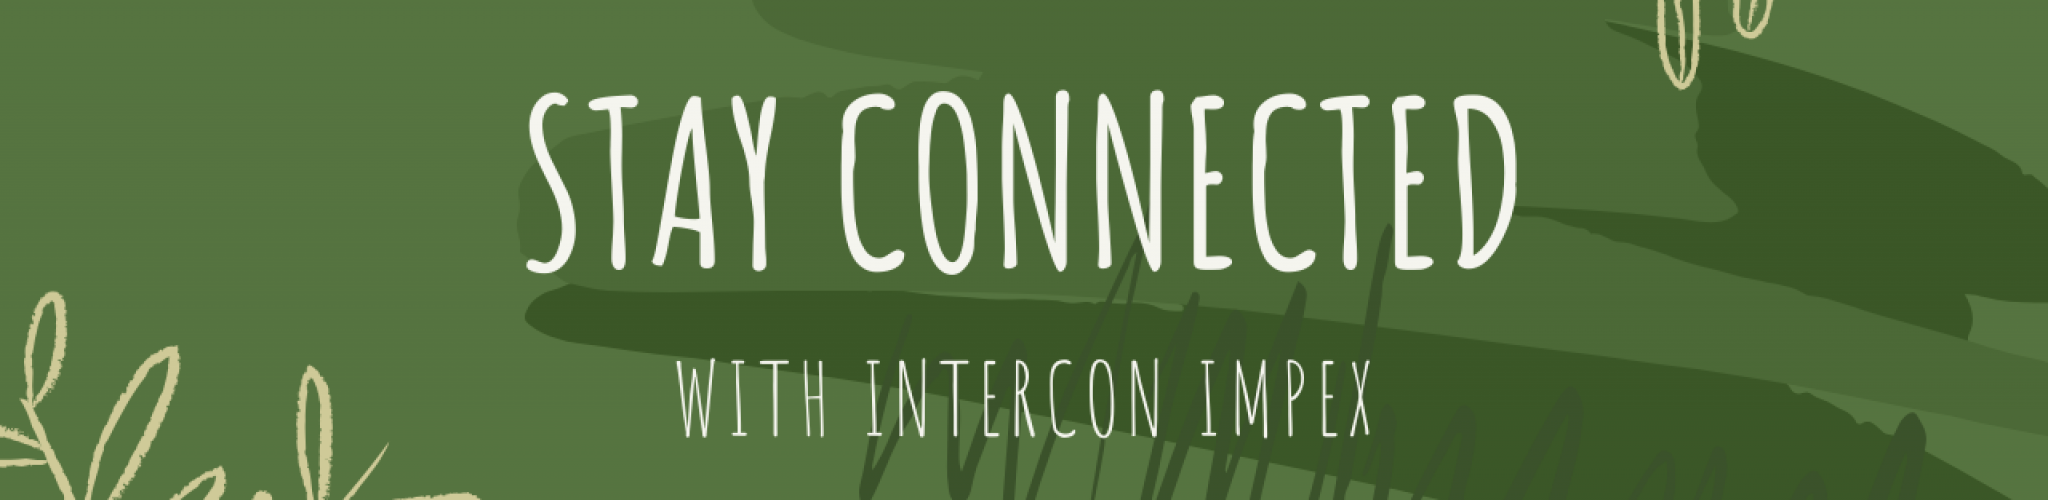 Stay Connected Banner